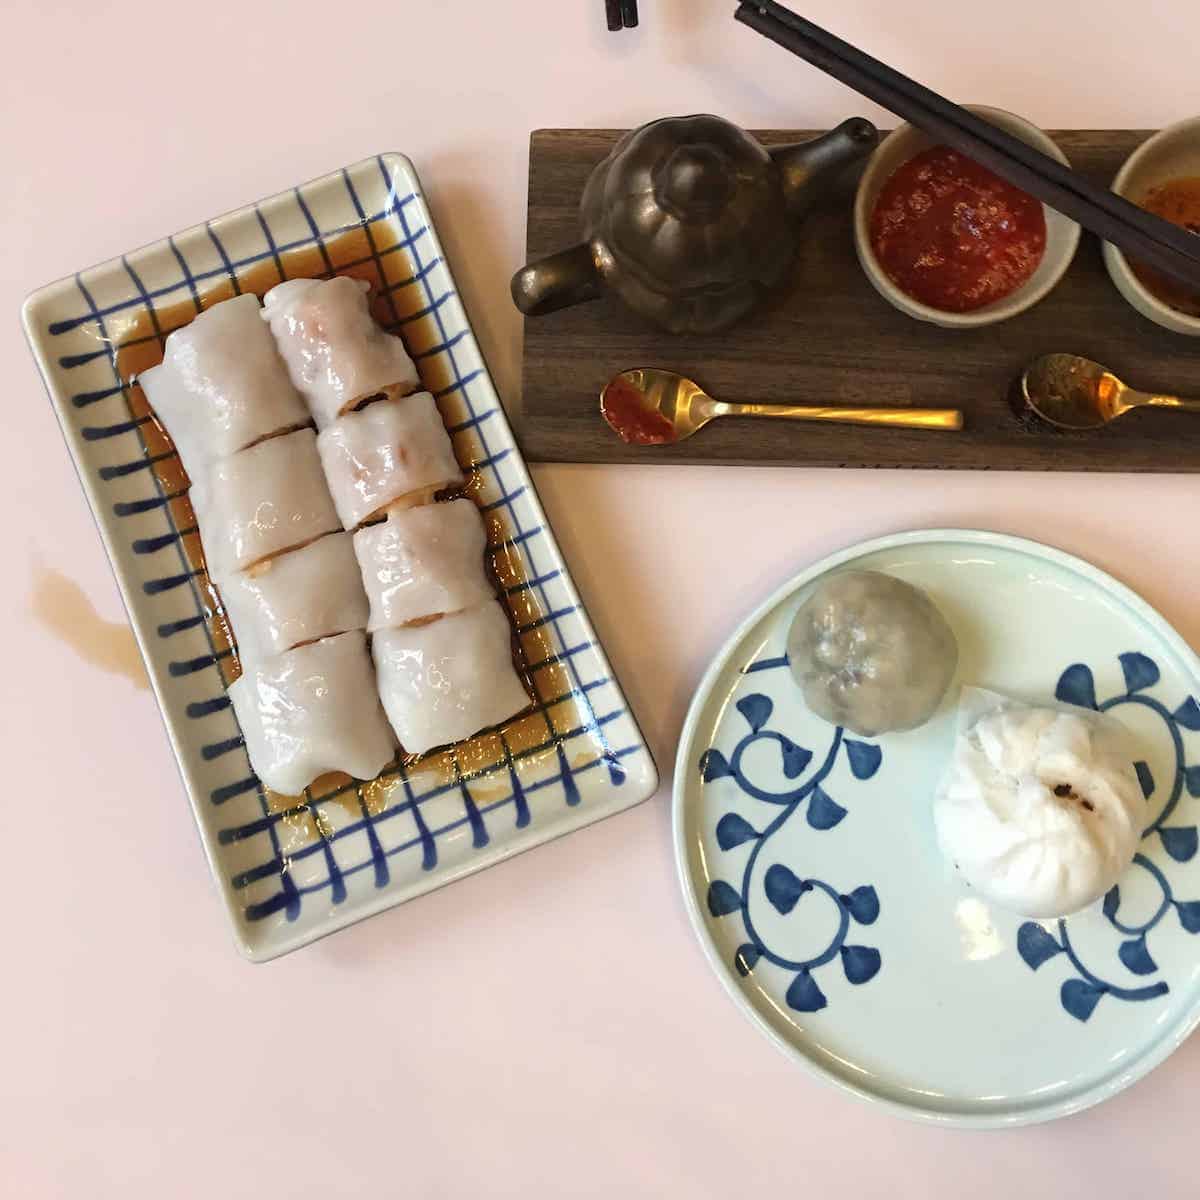 A dim sum spread on a pink table.